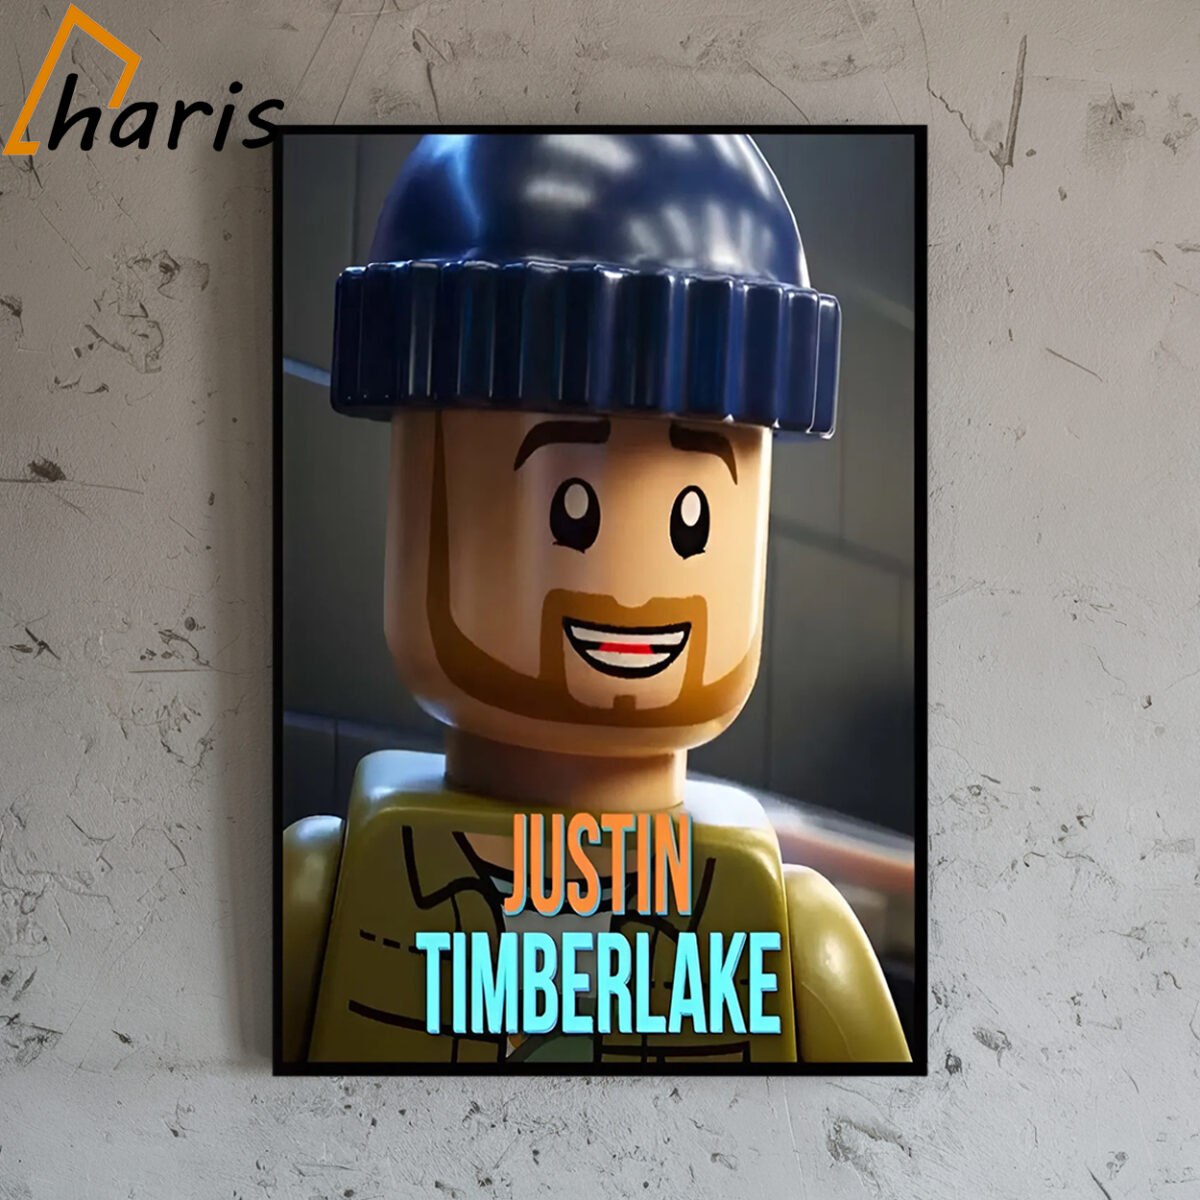 Official First Look At LEGO Version Of Justin Timberlake Poster 2